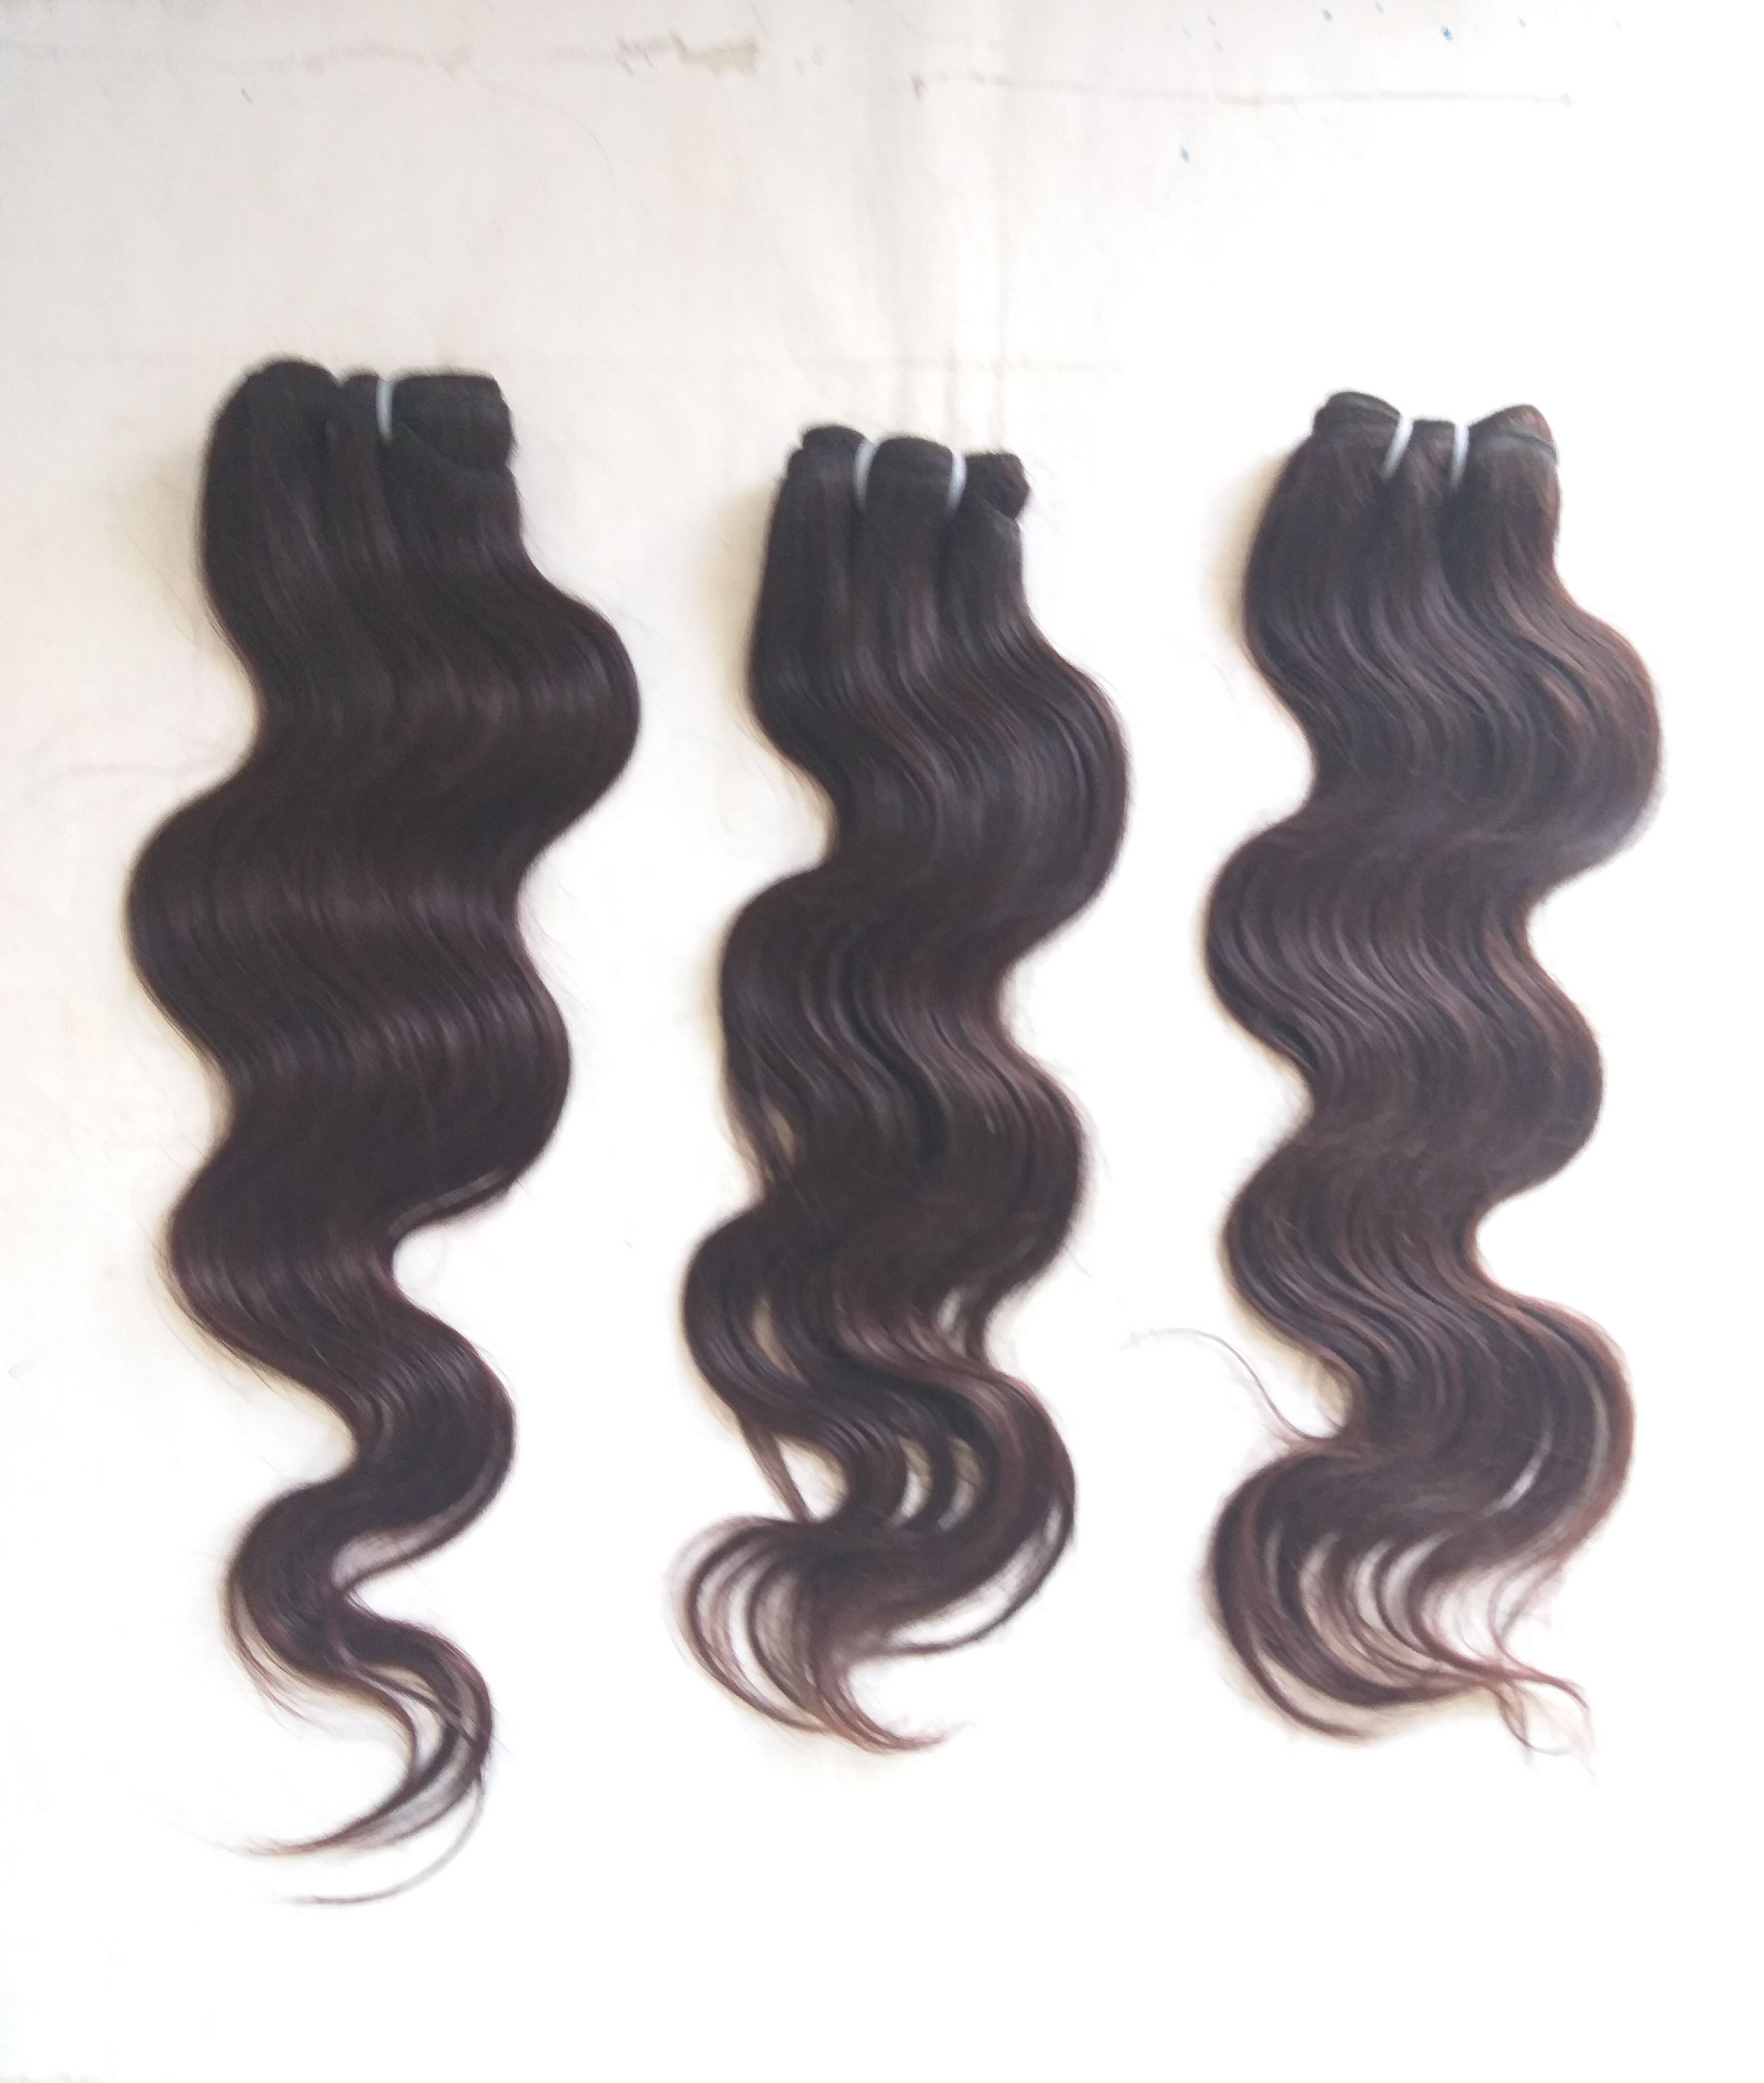 Malaysian Body Wave Double Machine Weft Hair Extensions